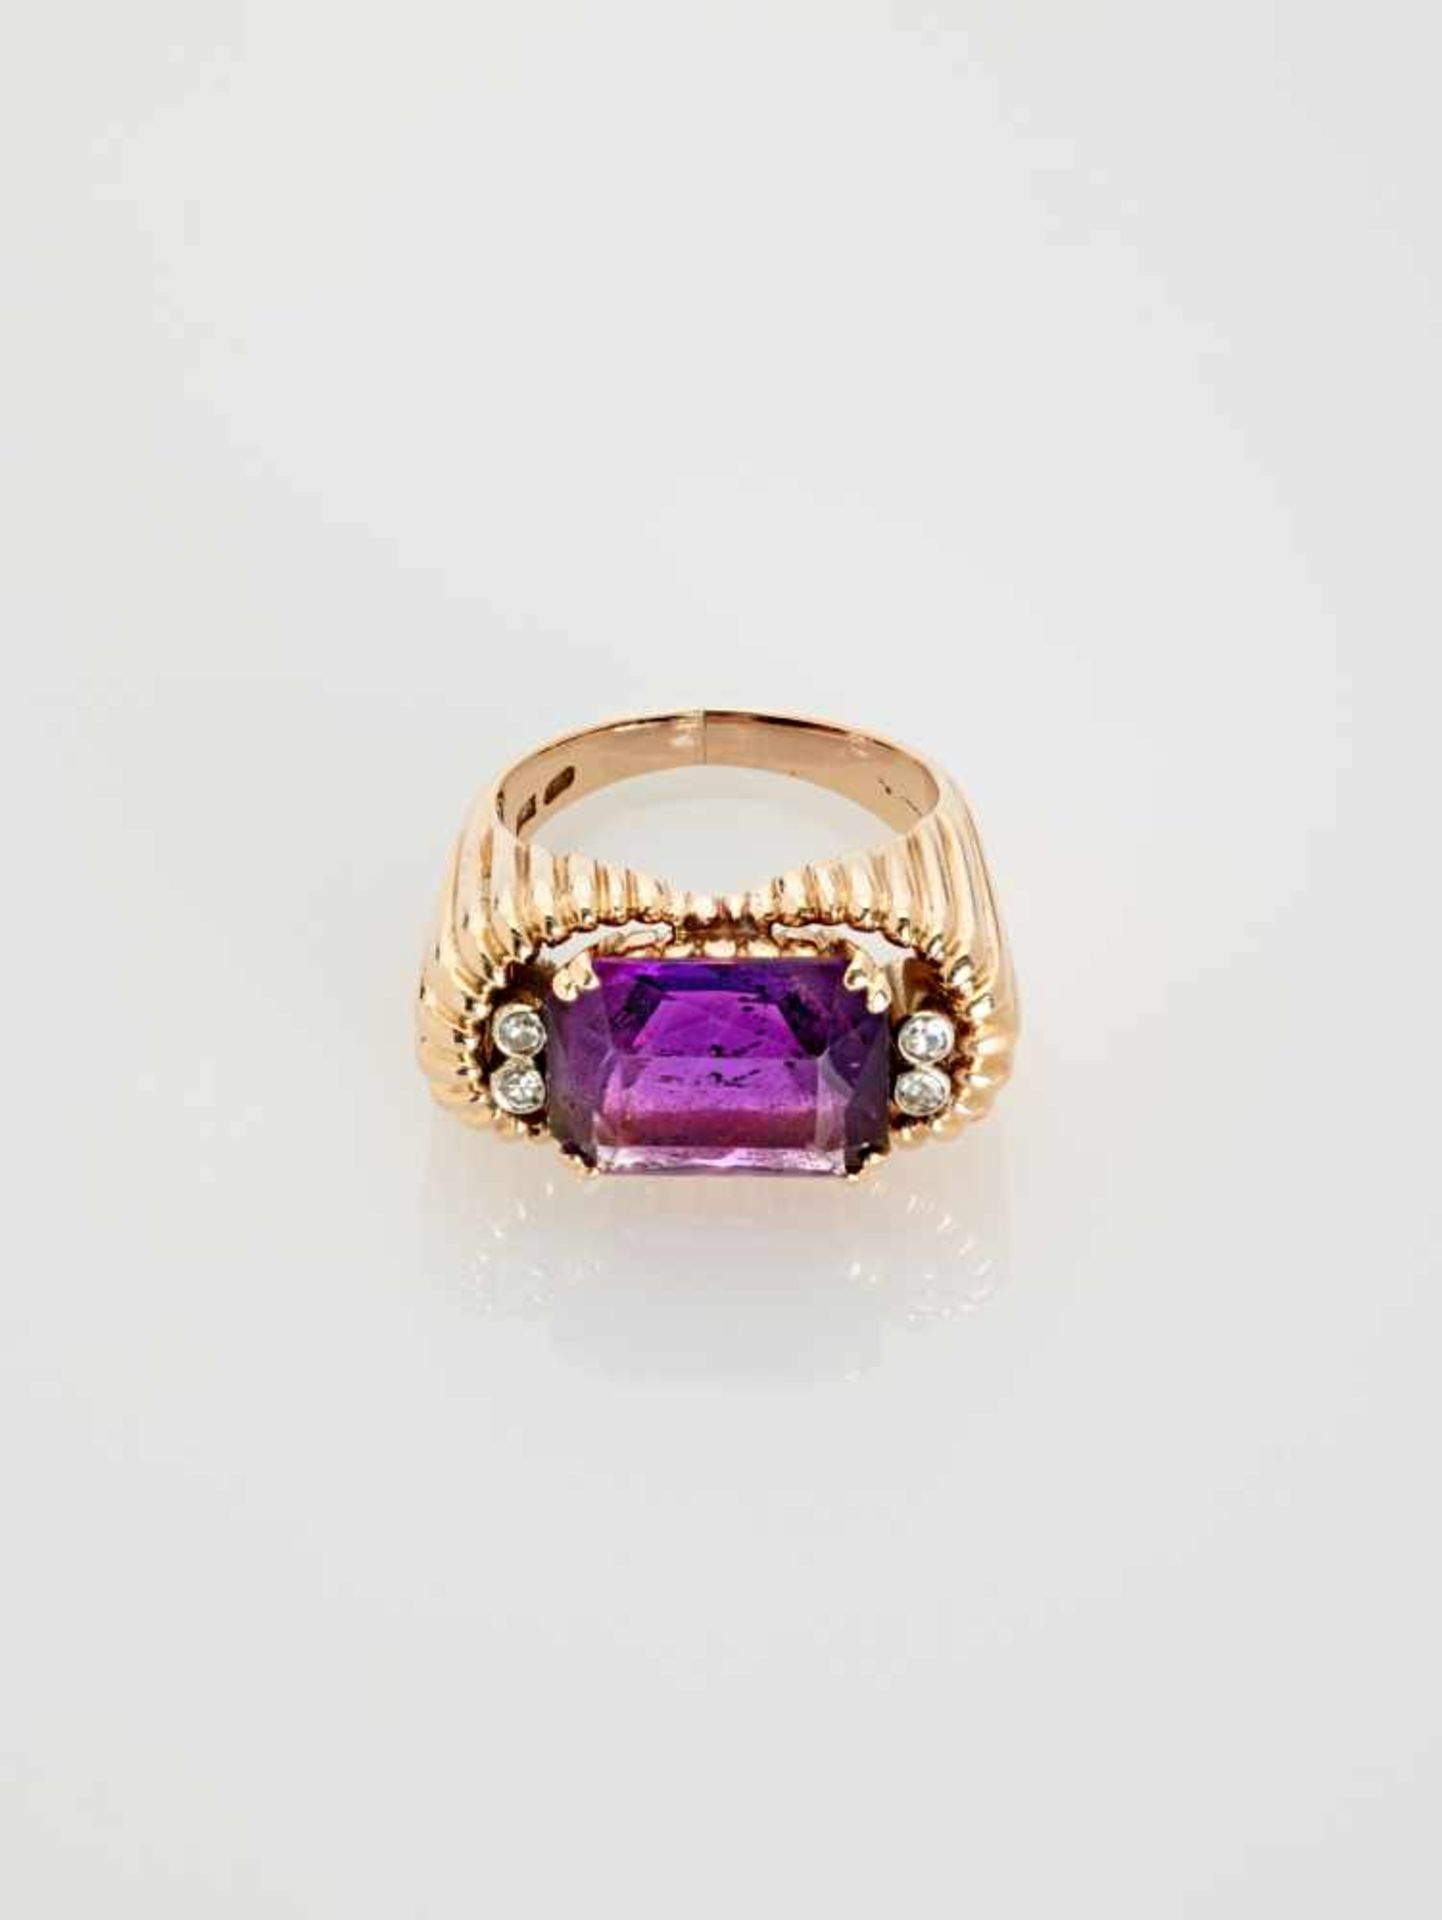 A DEEP PURPLE AMETHYST AND DIAMOND 14 CARAT PINK GOLD RINGAustriaAttributed to Erwin Paltscho, after - Image 3 of 7